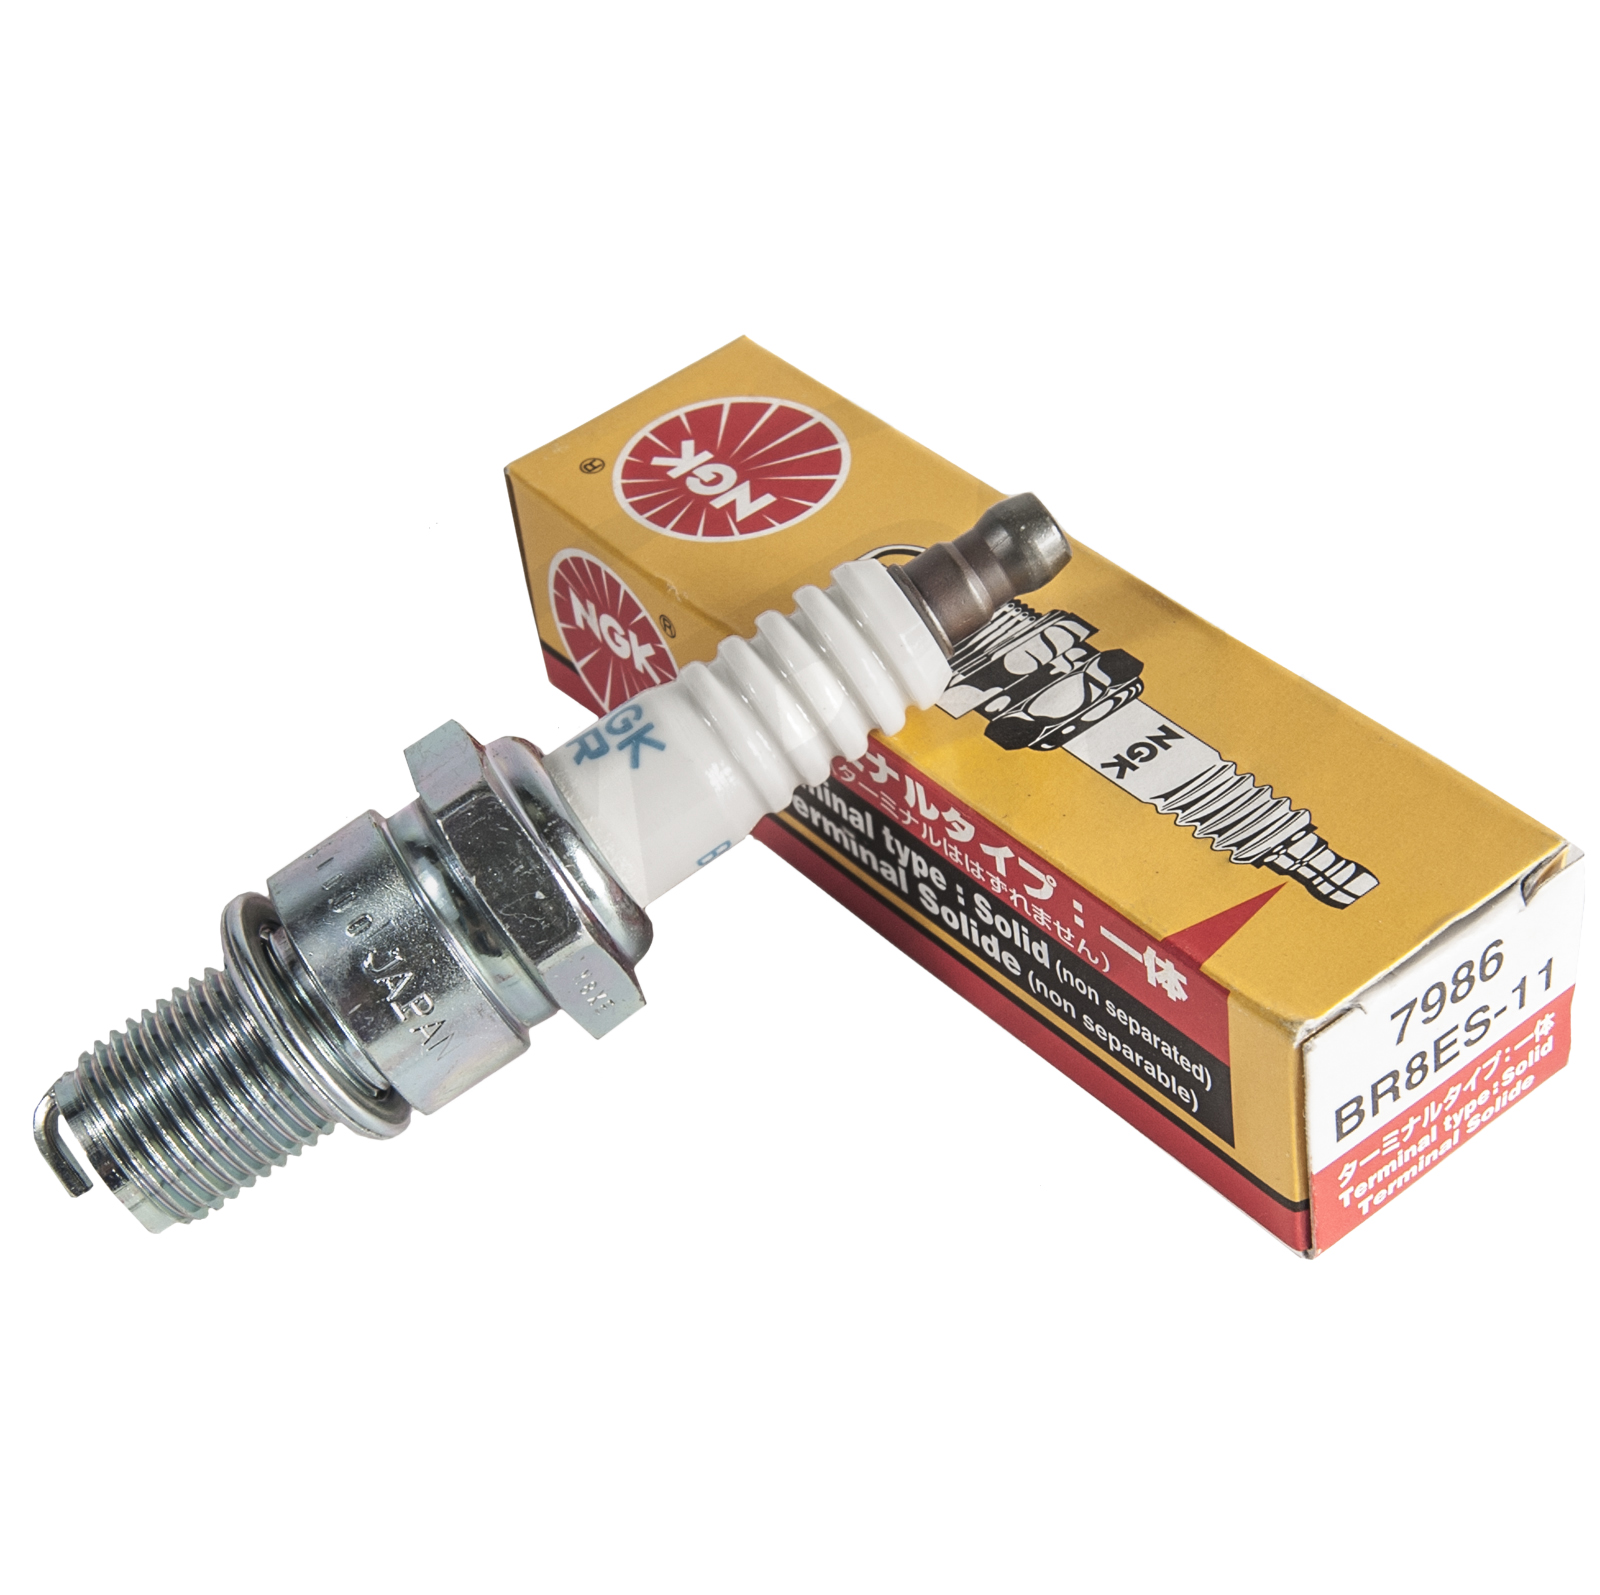 L-Head NGK Spark Plug for BRIGGS & STRATTON Eng 11HP 256400 256700 Series